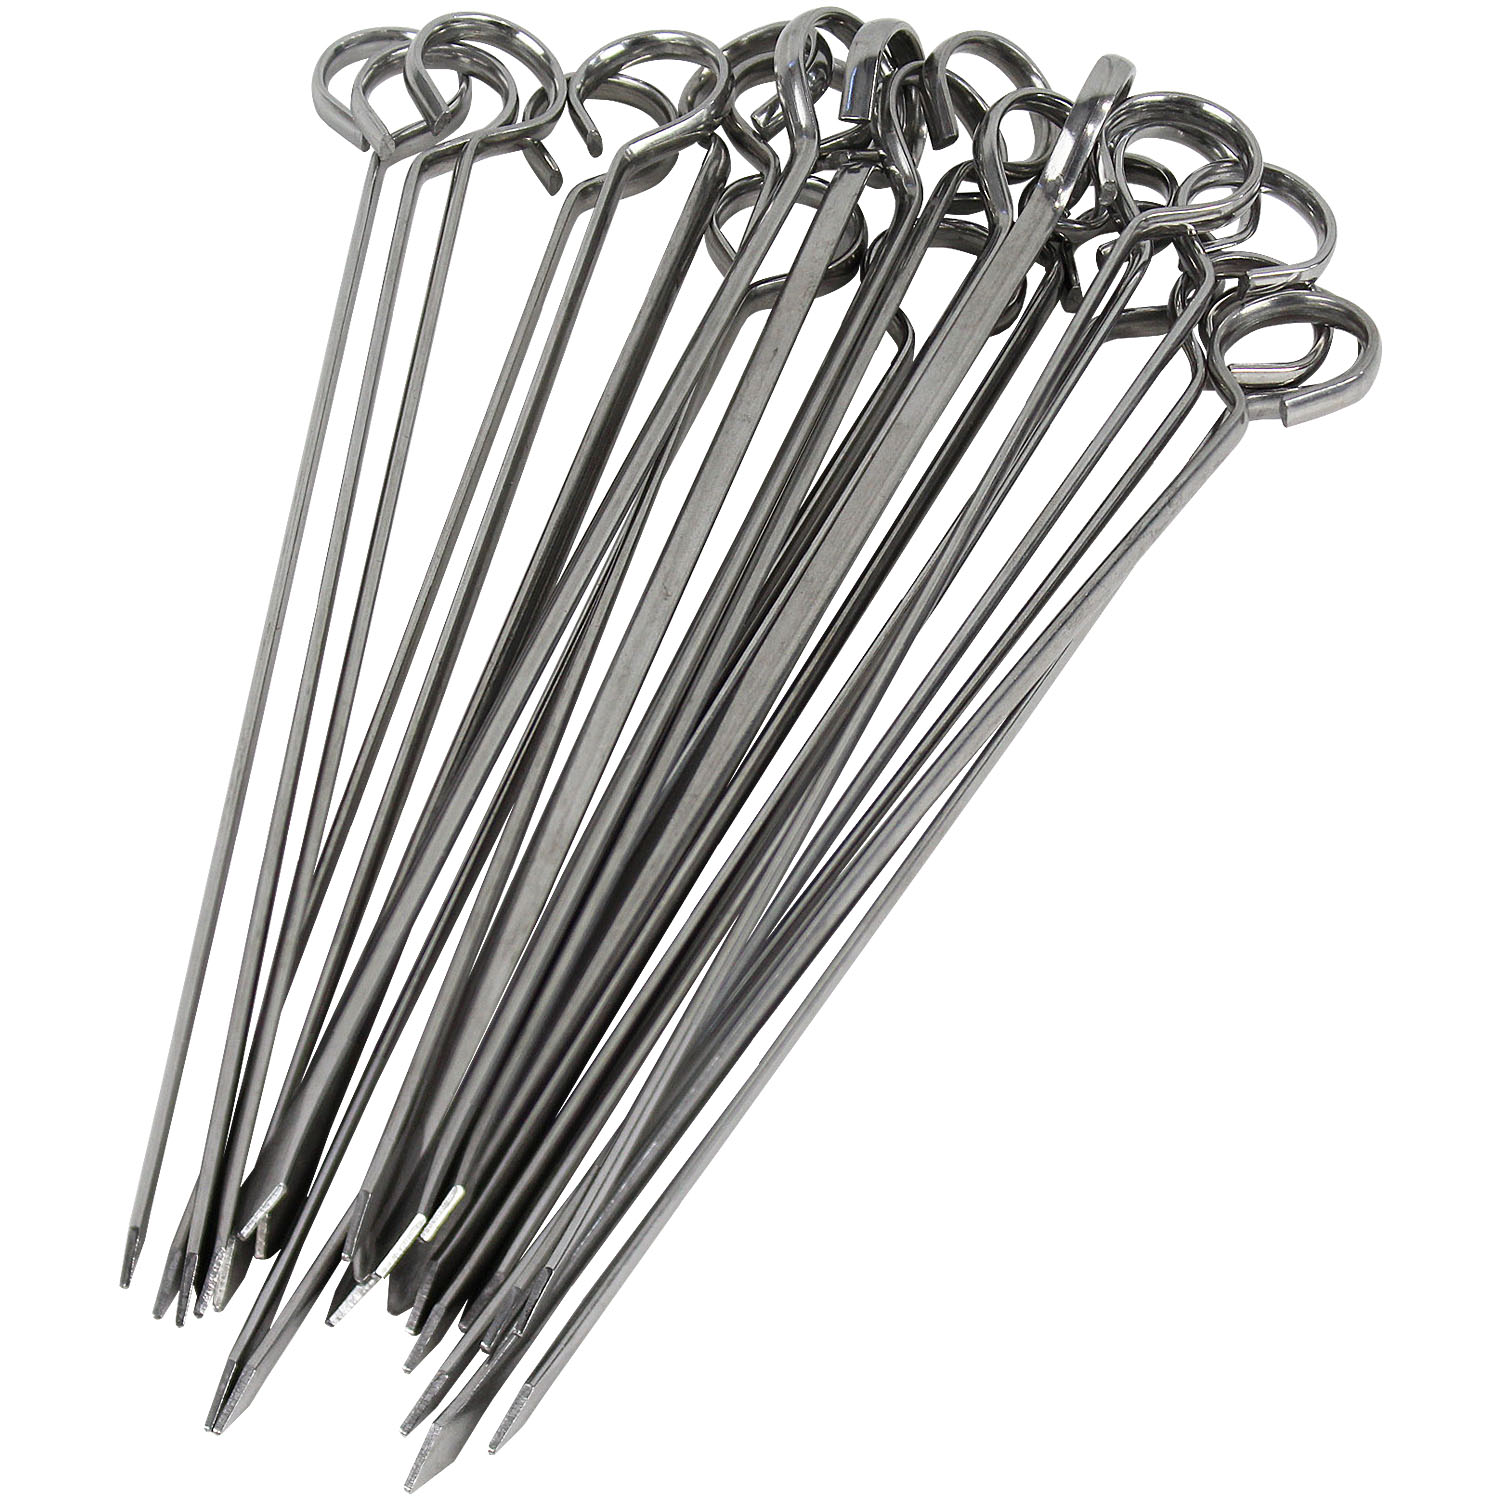 8 inch BBQ Skewers Set of 24, Used for Barbecuing Meat, Poultry, Seafood, Vegetables, Cheese, Fruit, Stainless Steel, Barbeque Accessories